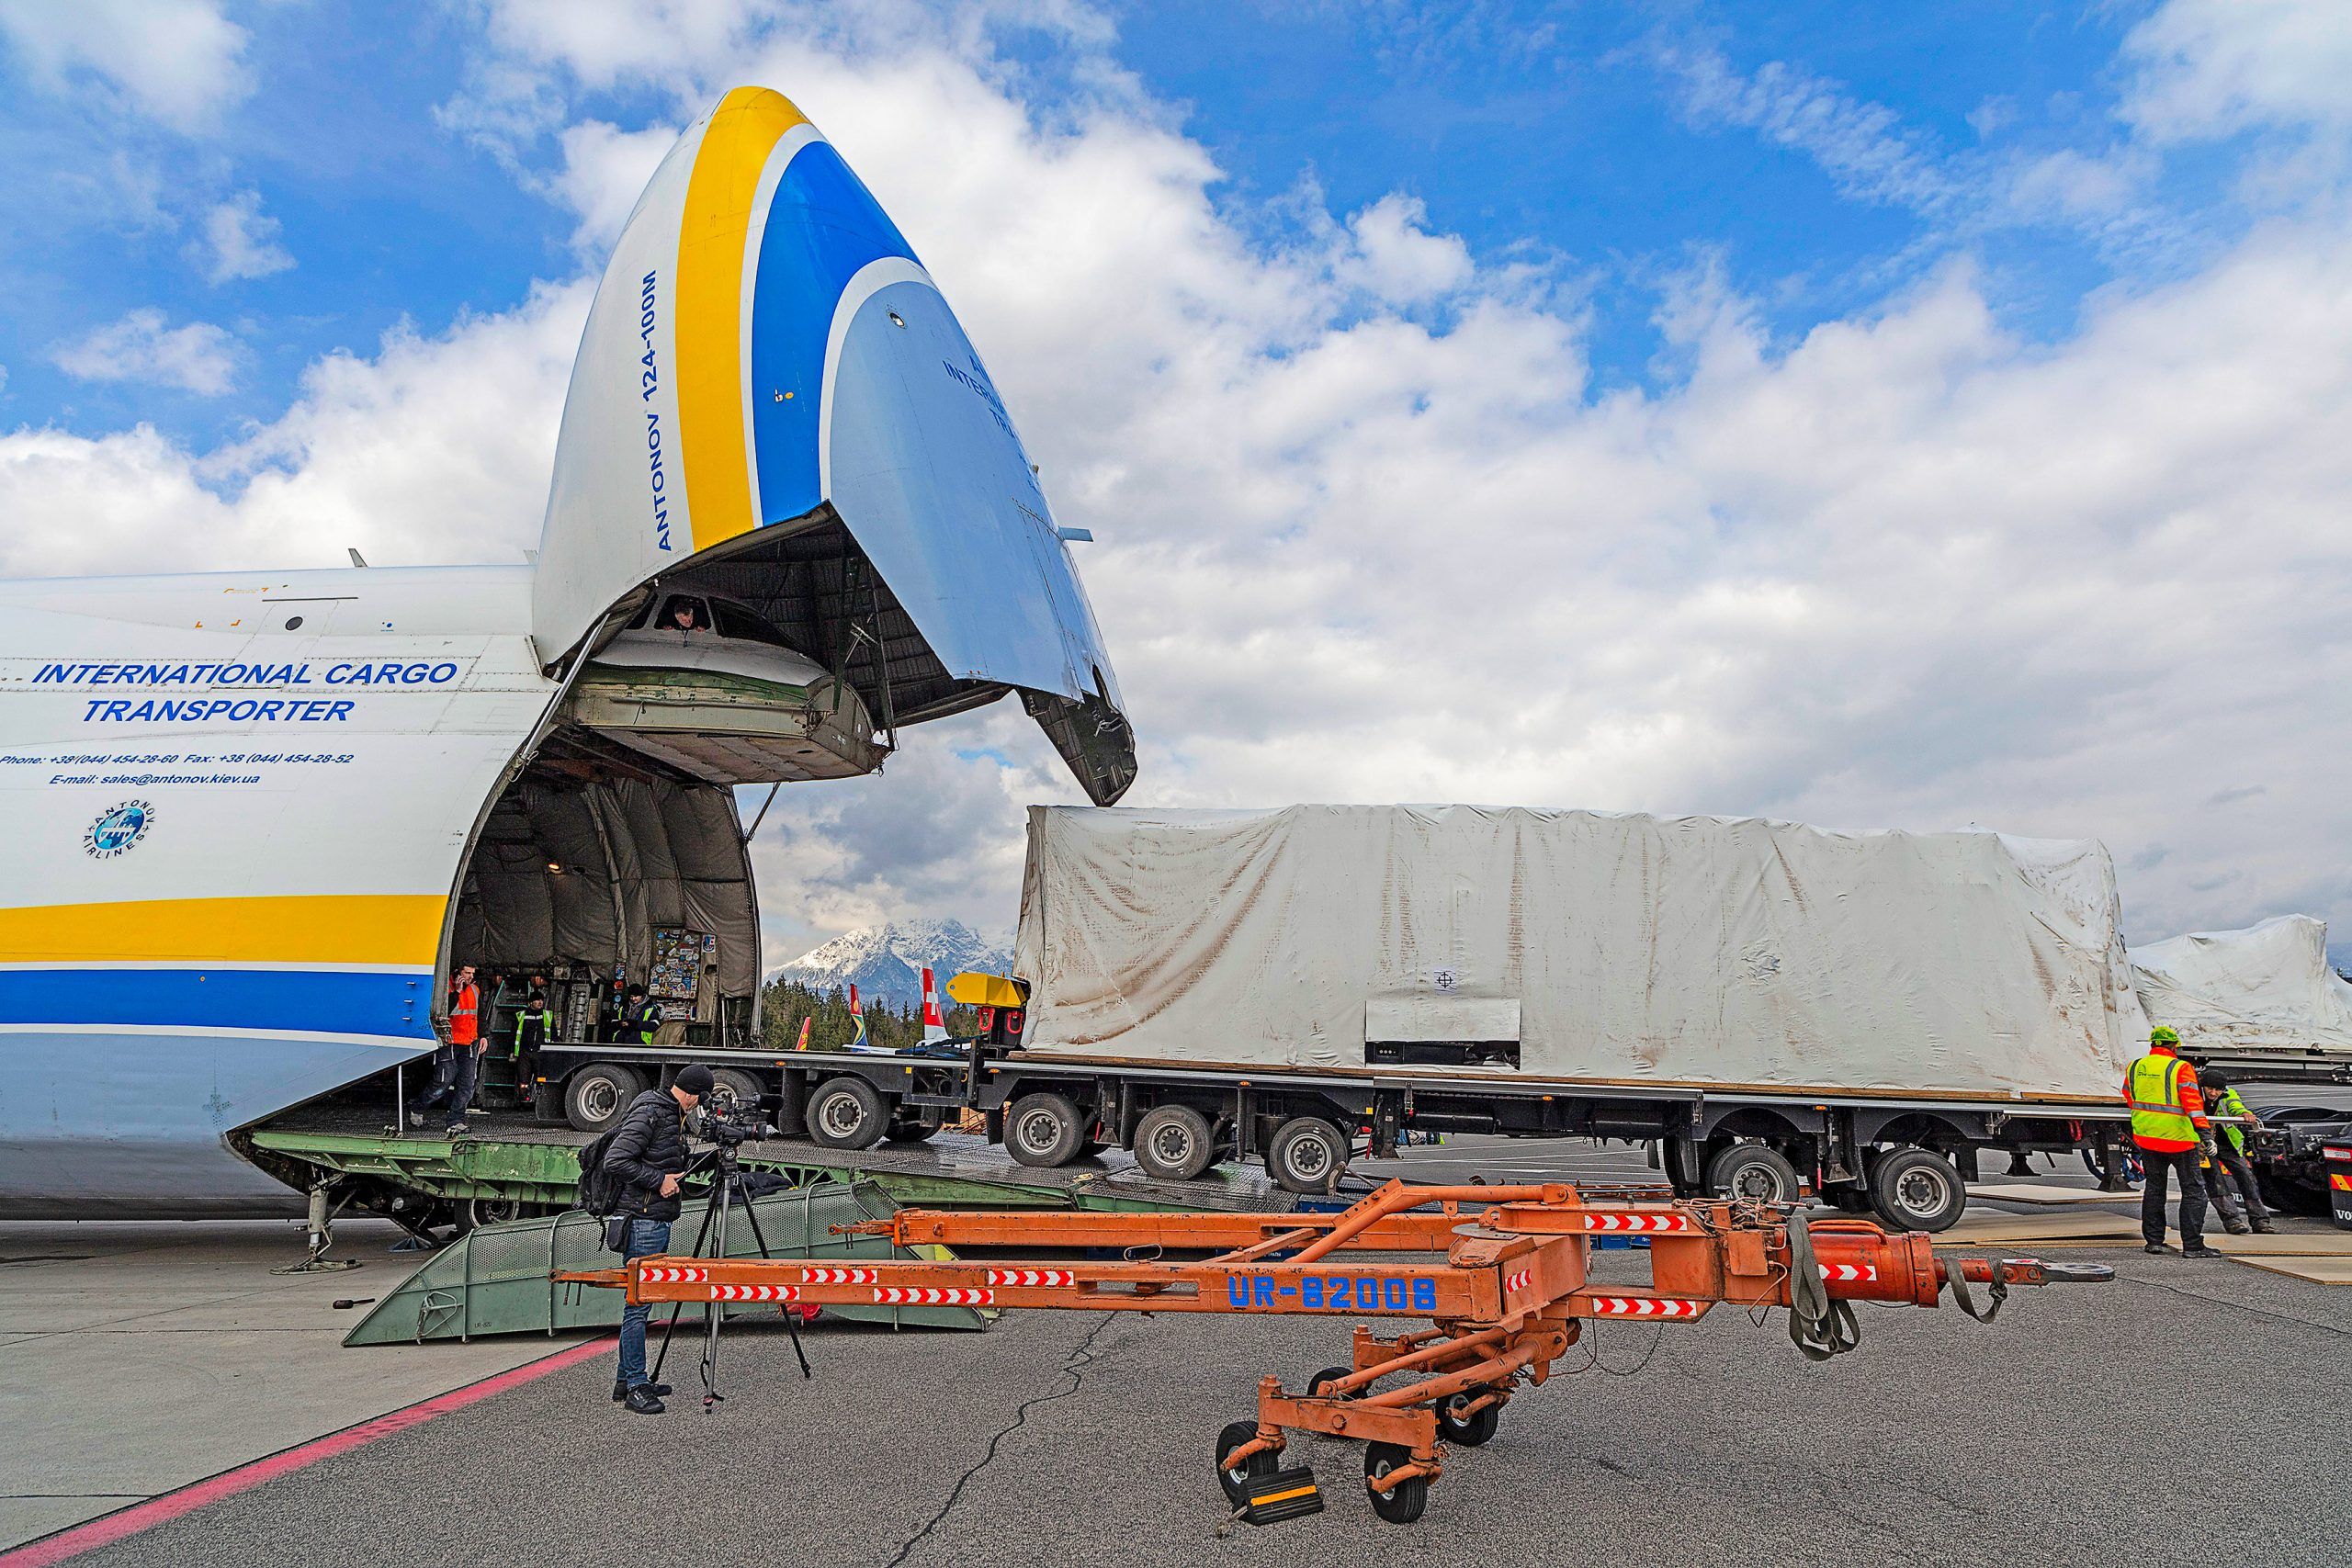 Antonov An-124 being loaded with cargo